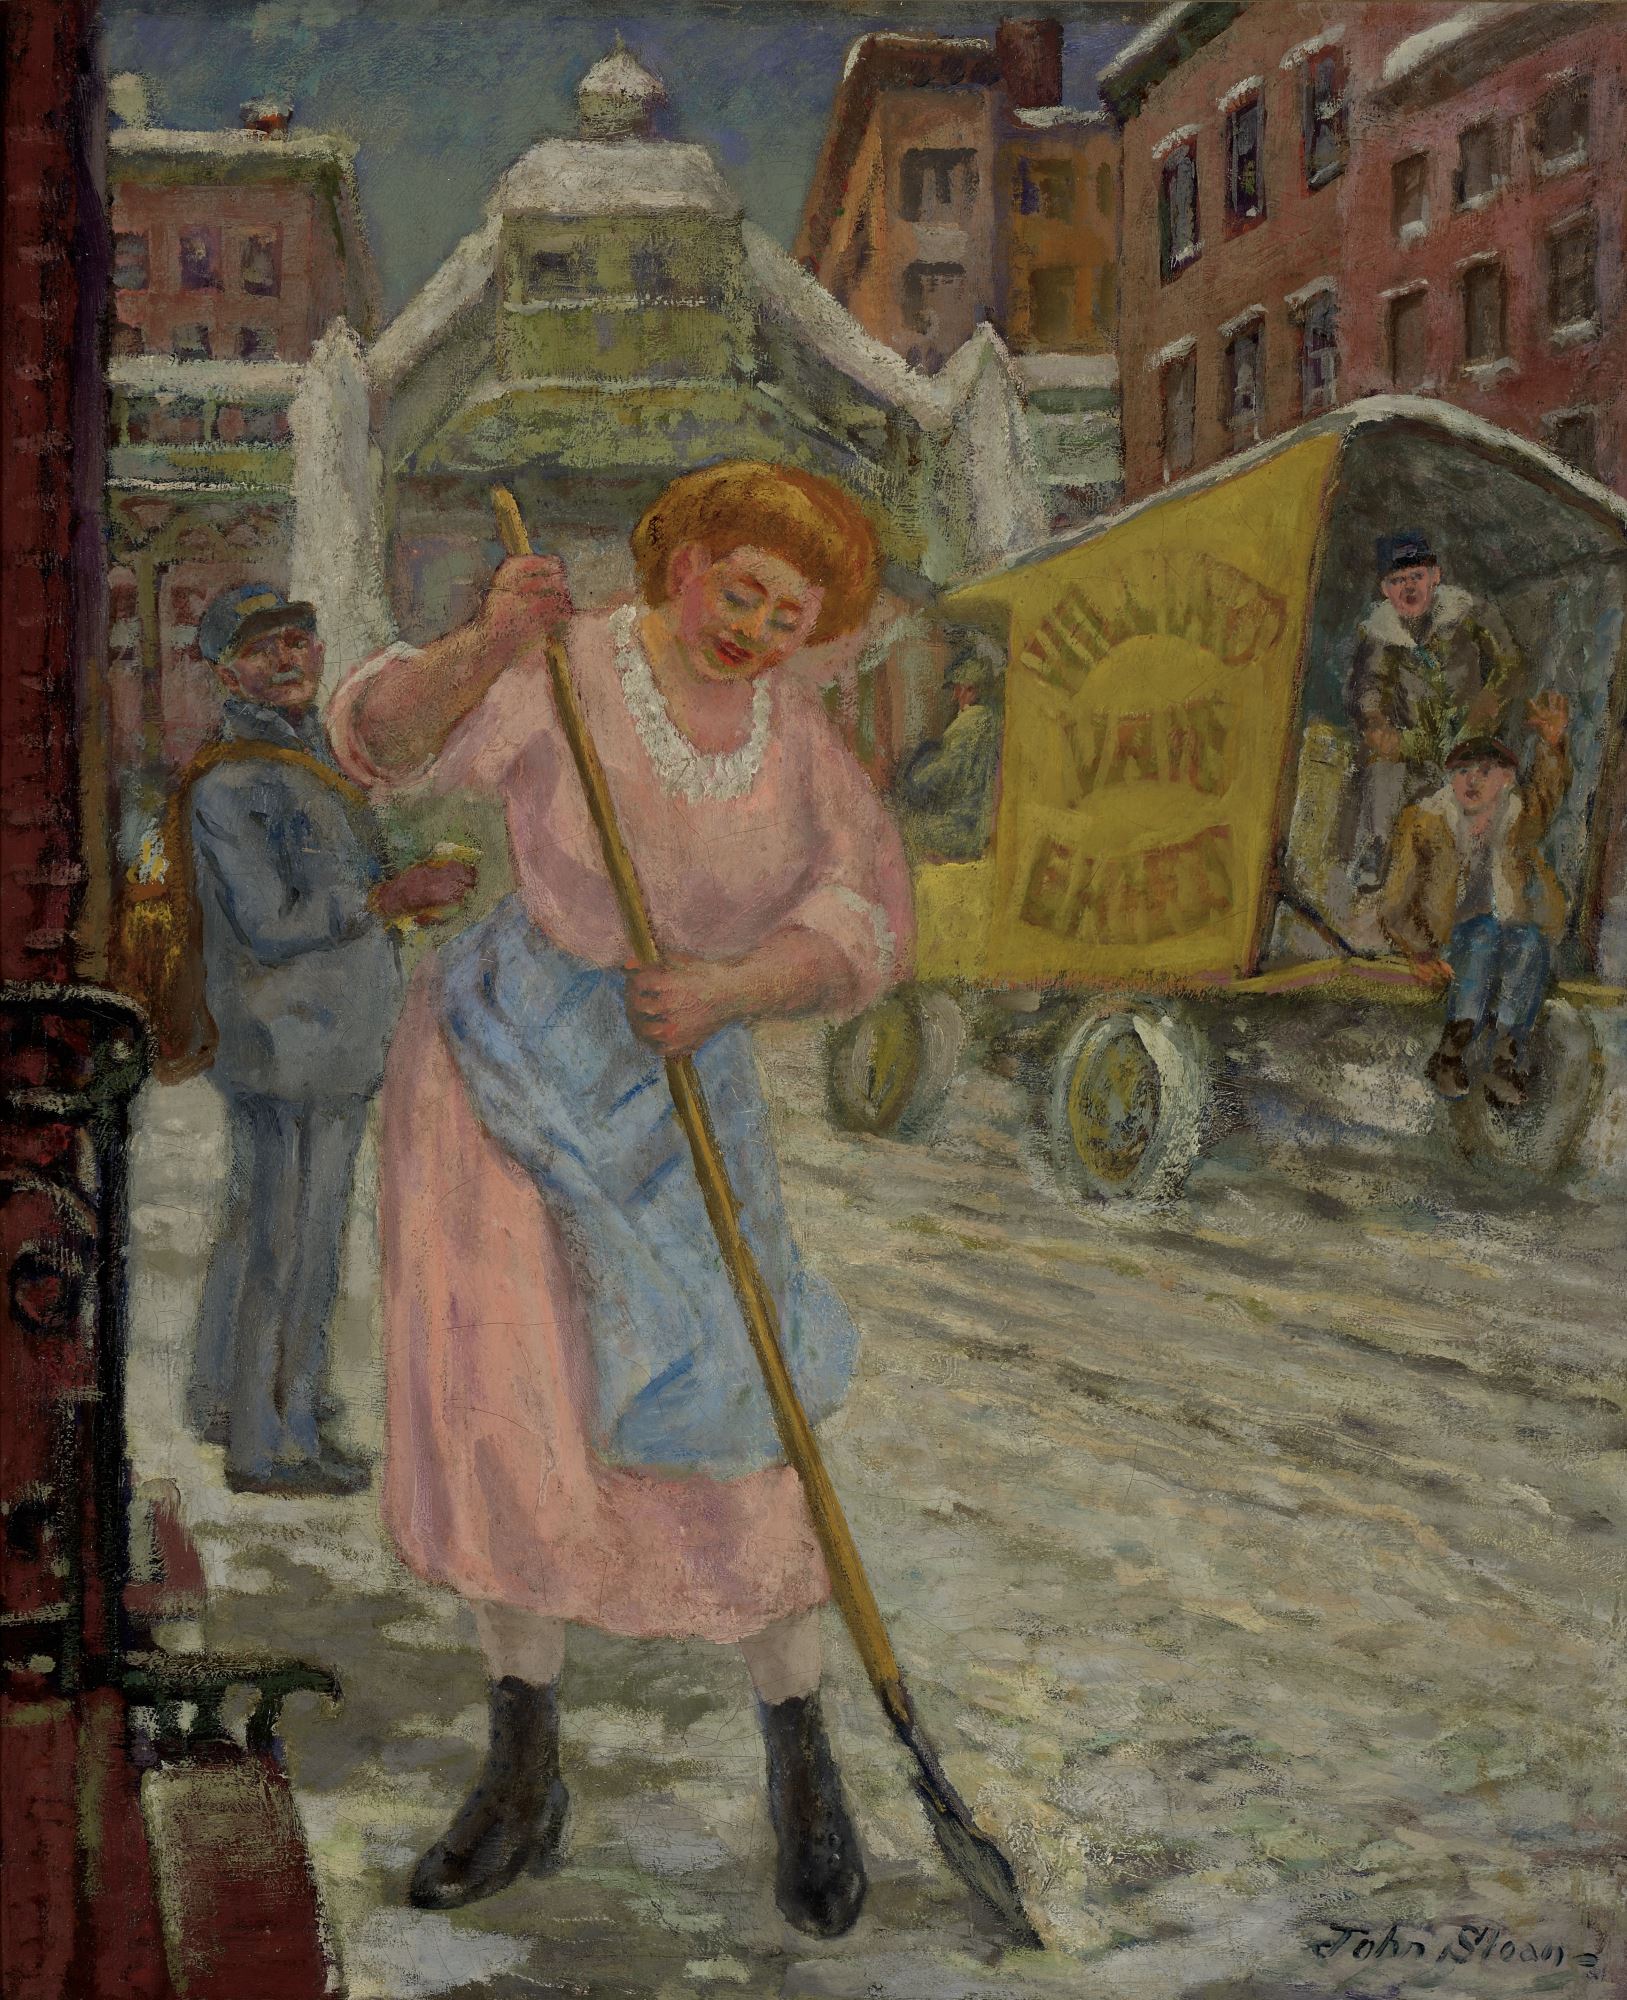 <p>John Sloan, <em>Maid Cutting Ice</em>. Oil with tempera and oil-varnish glazes on canvas, 24 x 20 inches. Collection of the Nasher Museum of Art at Duke University.</p>
